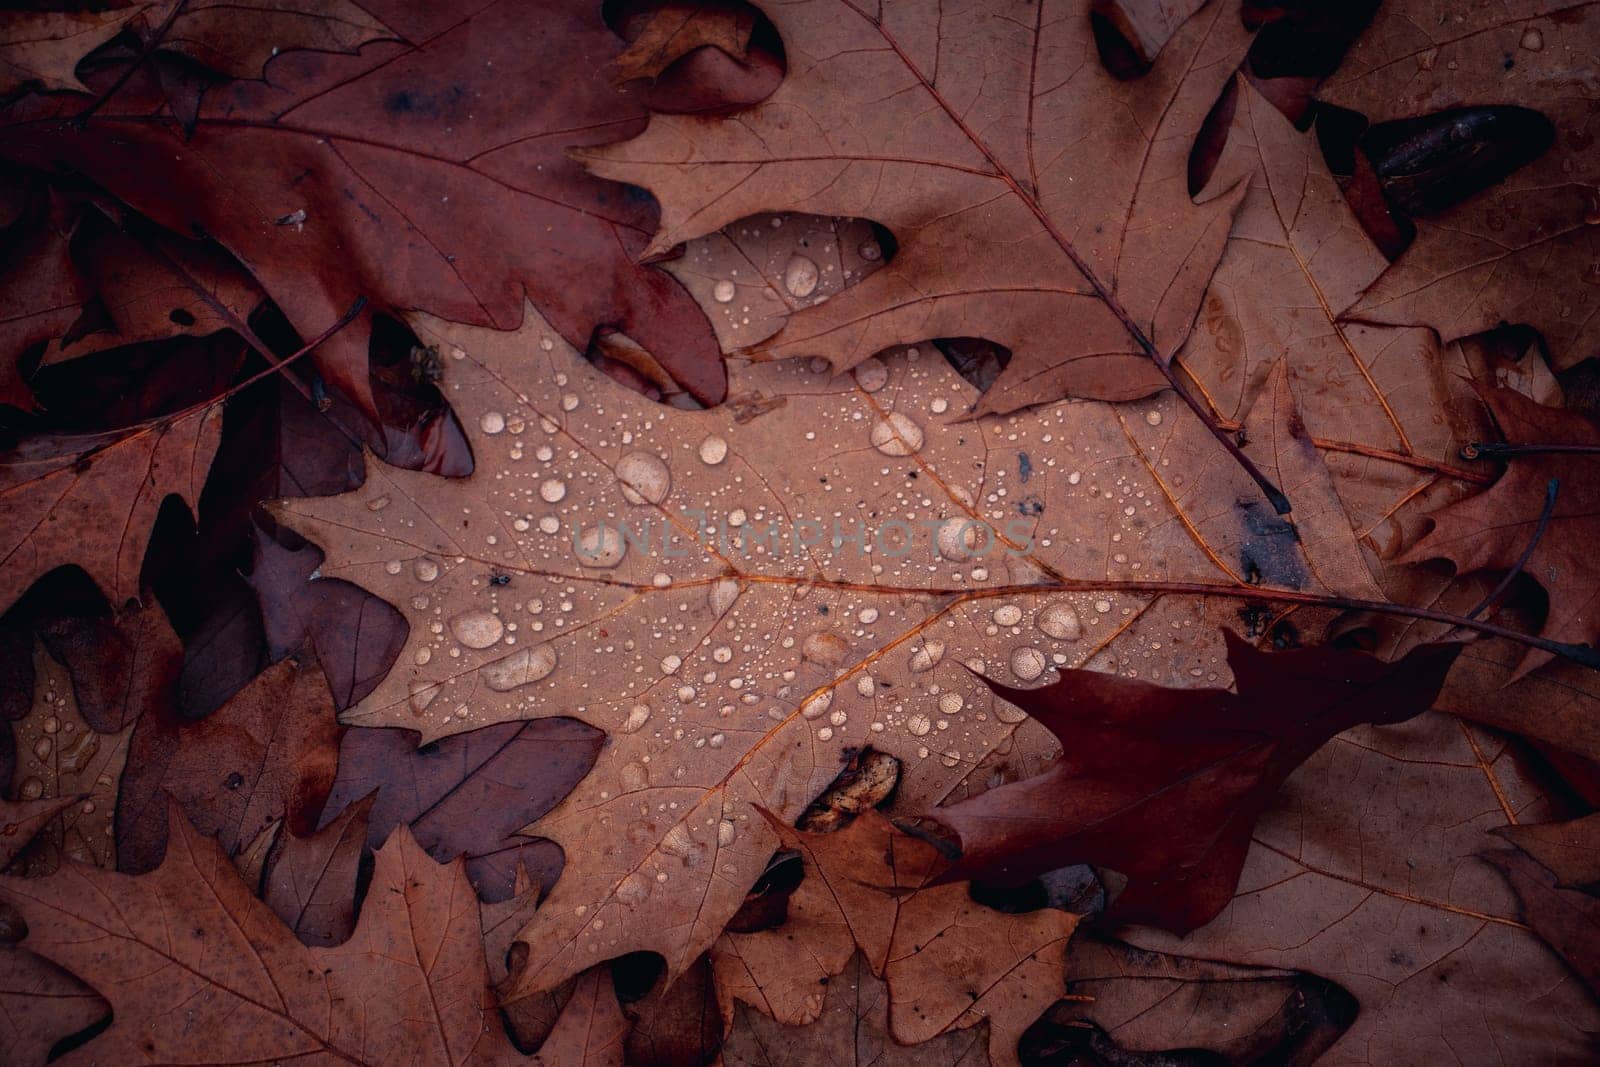 Wet oak leaves on the ground in rainy forest concept photo. Autumn atmosphere image. Beautiful nature scenery photography. High quality picture for wallpaper, travel blog.